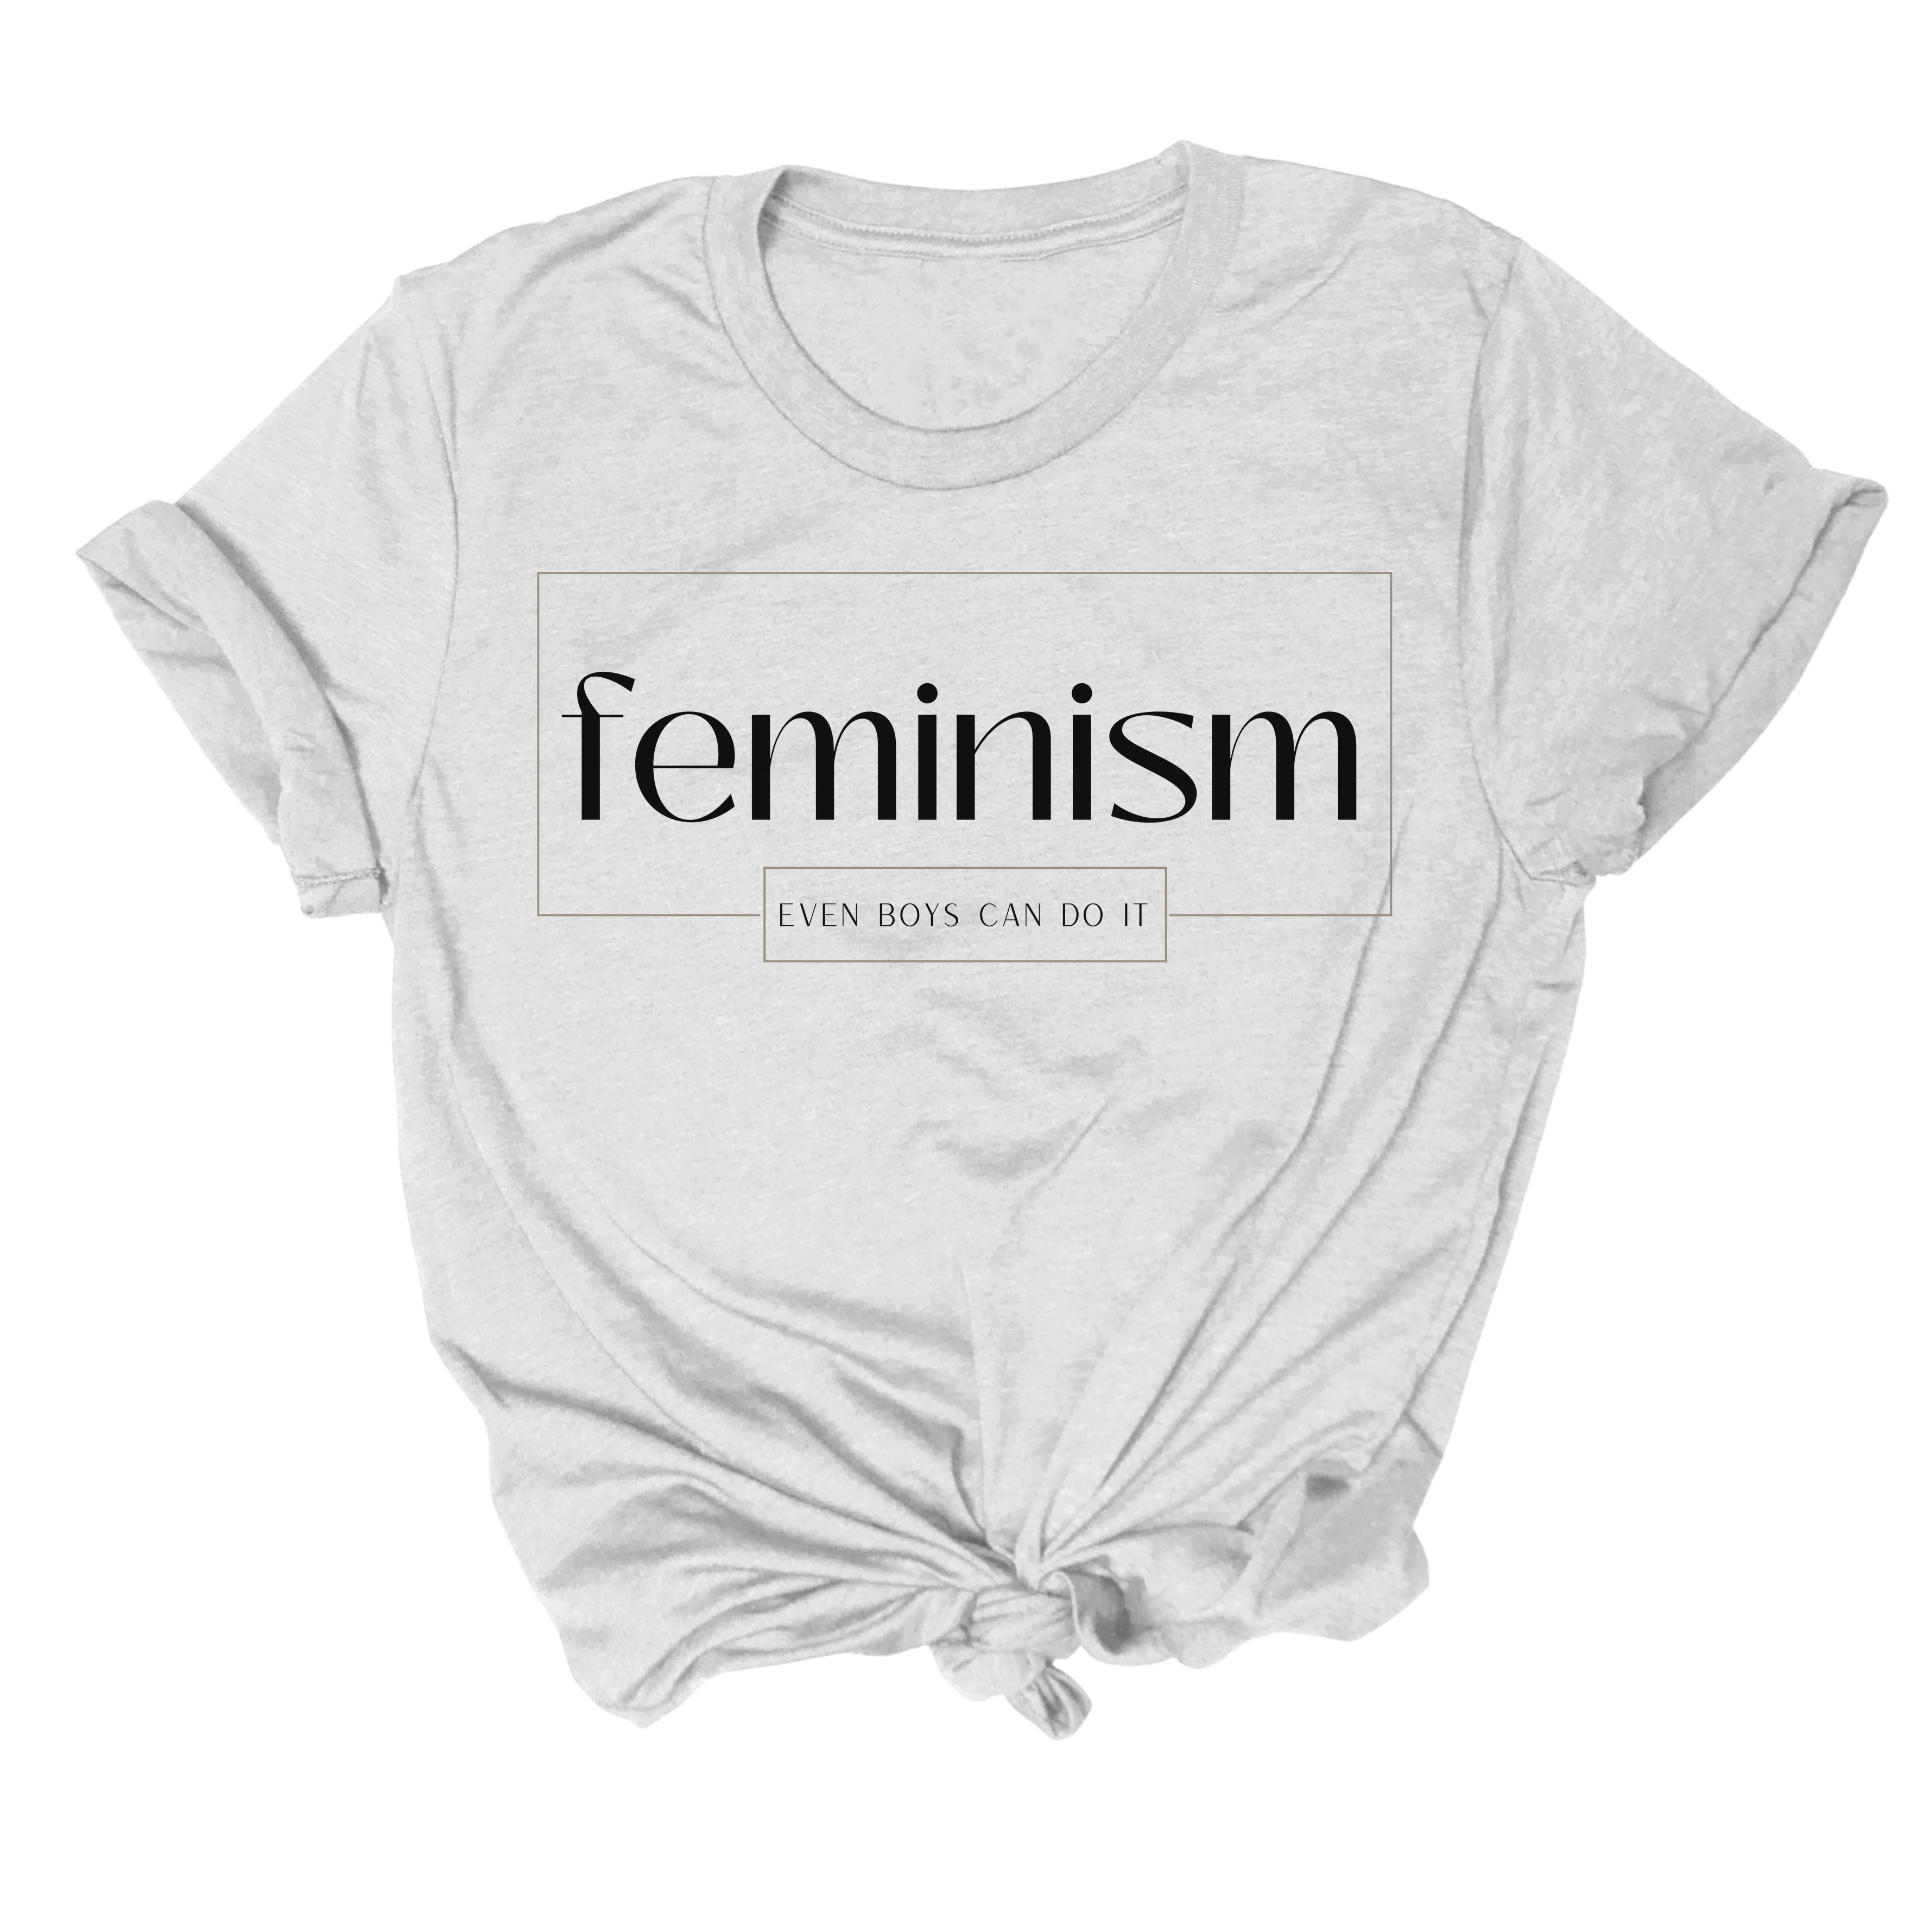 feminist themed tshirt that says feminism even boys can do it